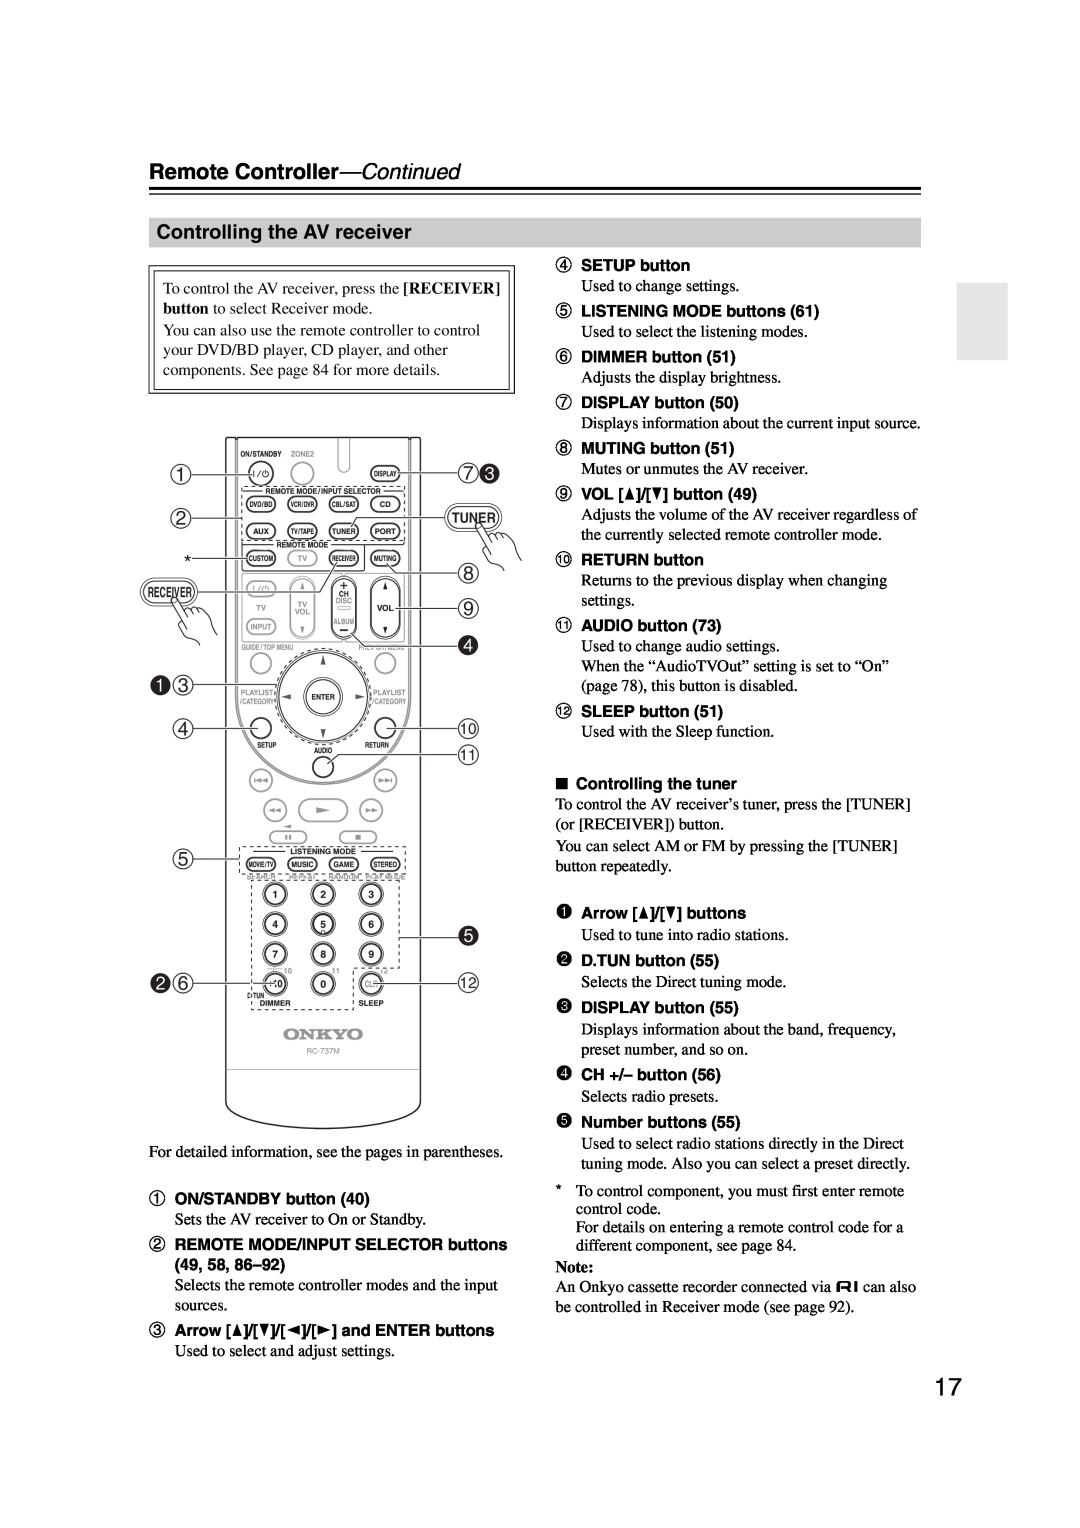 Onkyo HT-S6200, 29344937 instruction manual Remote Controller—Continued, Controlling the AV receiver, 4 1c 